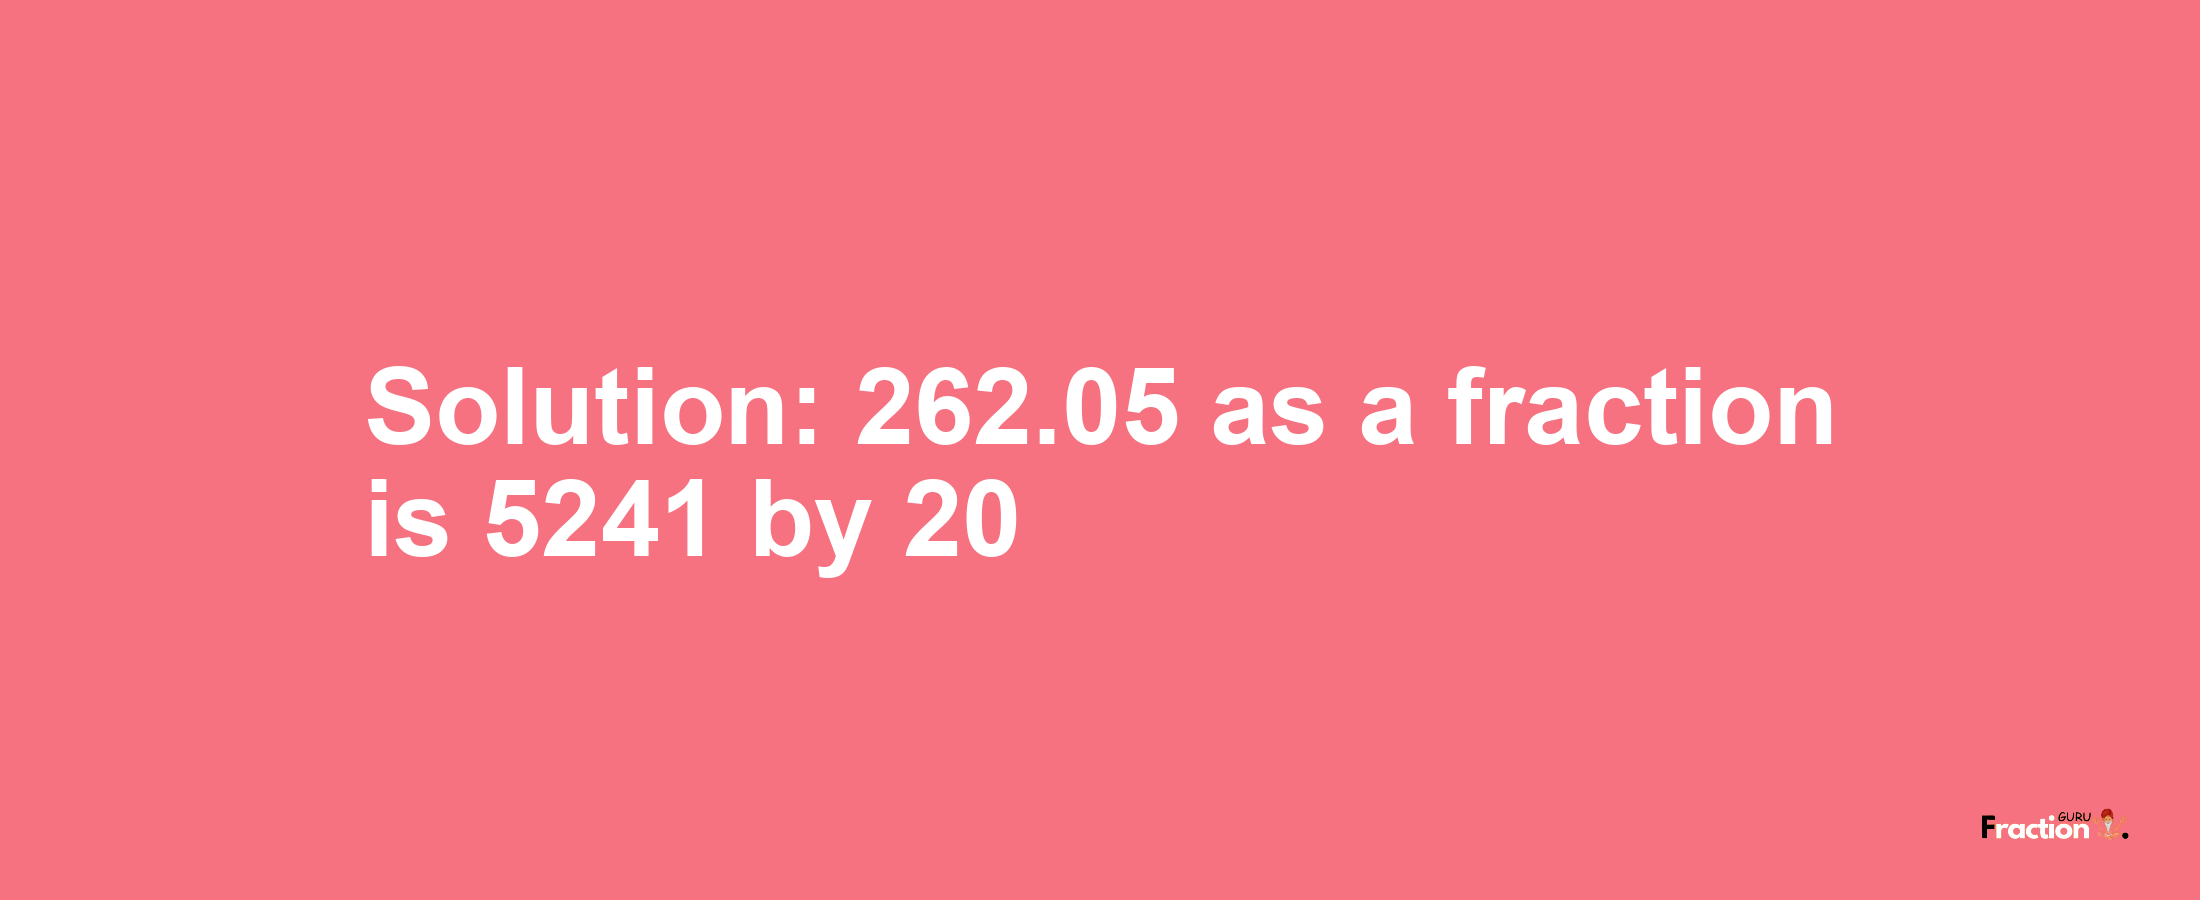 Solution:262.05 as a fraction is 5241/20